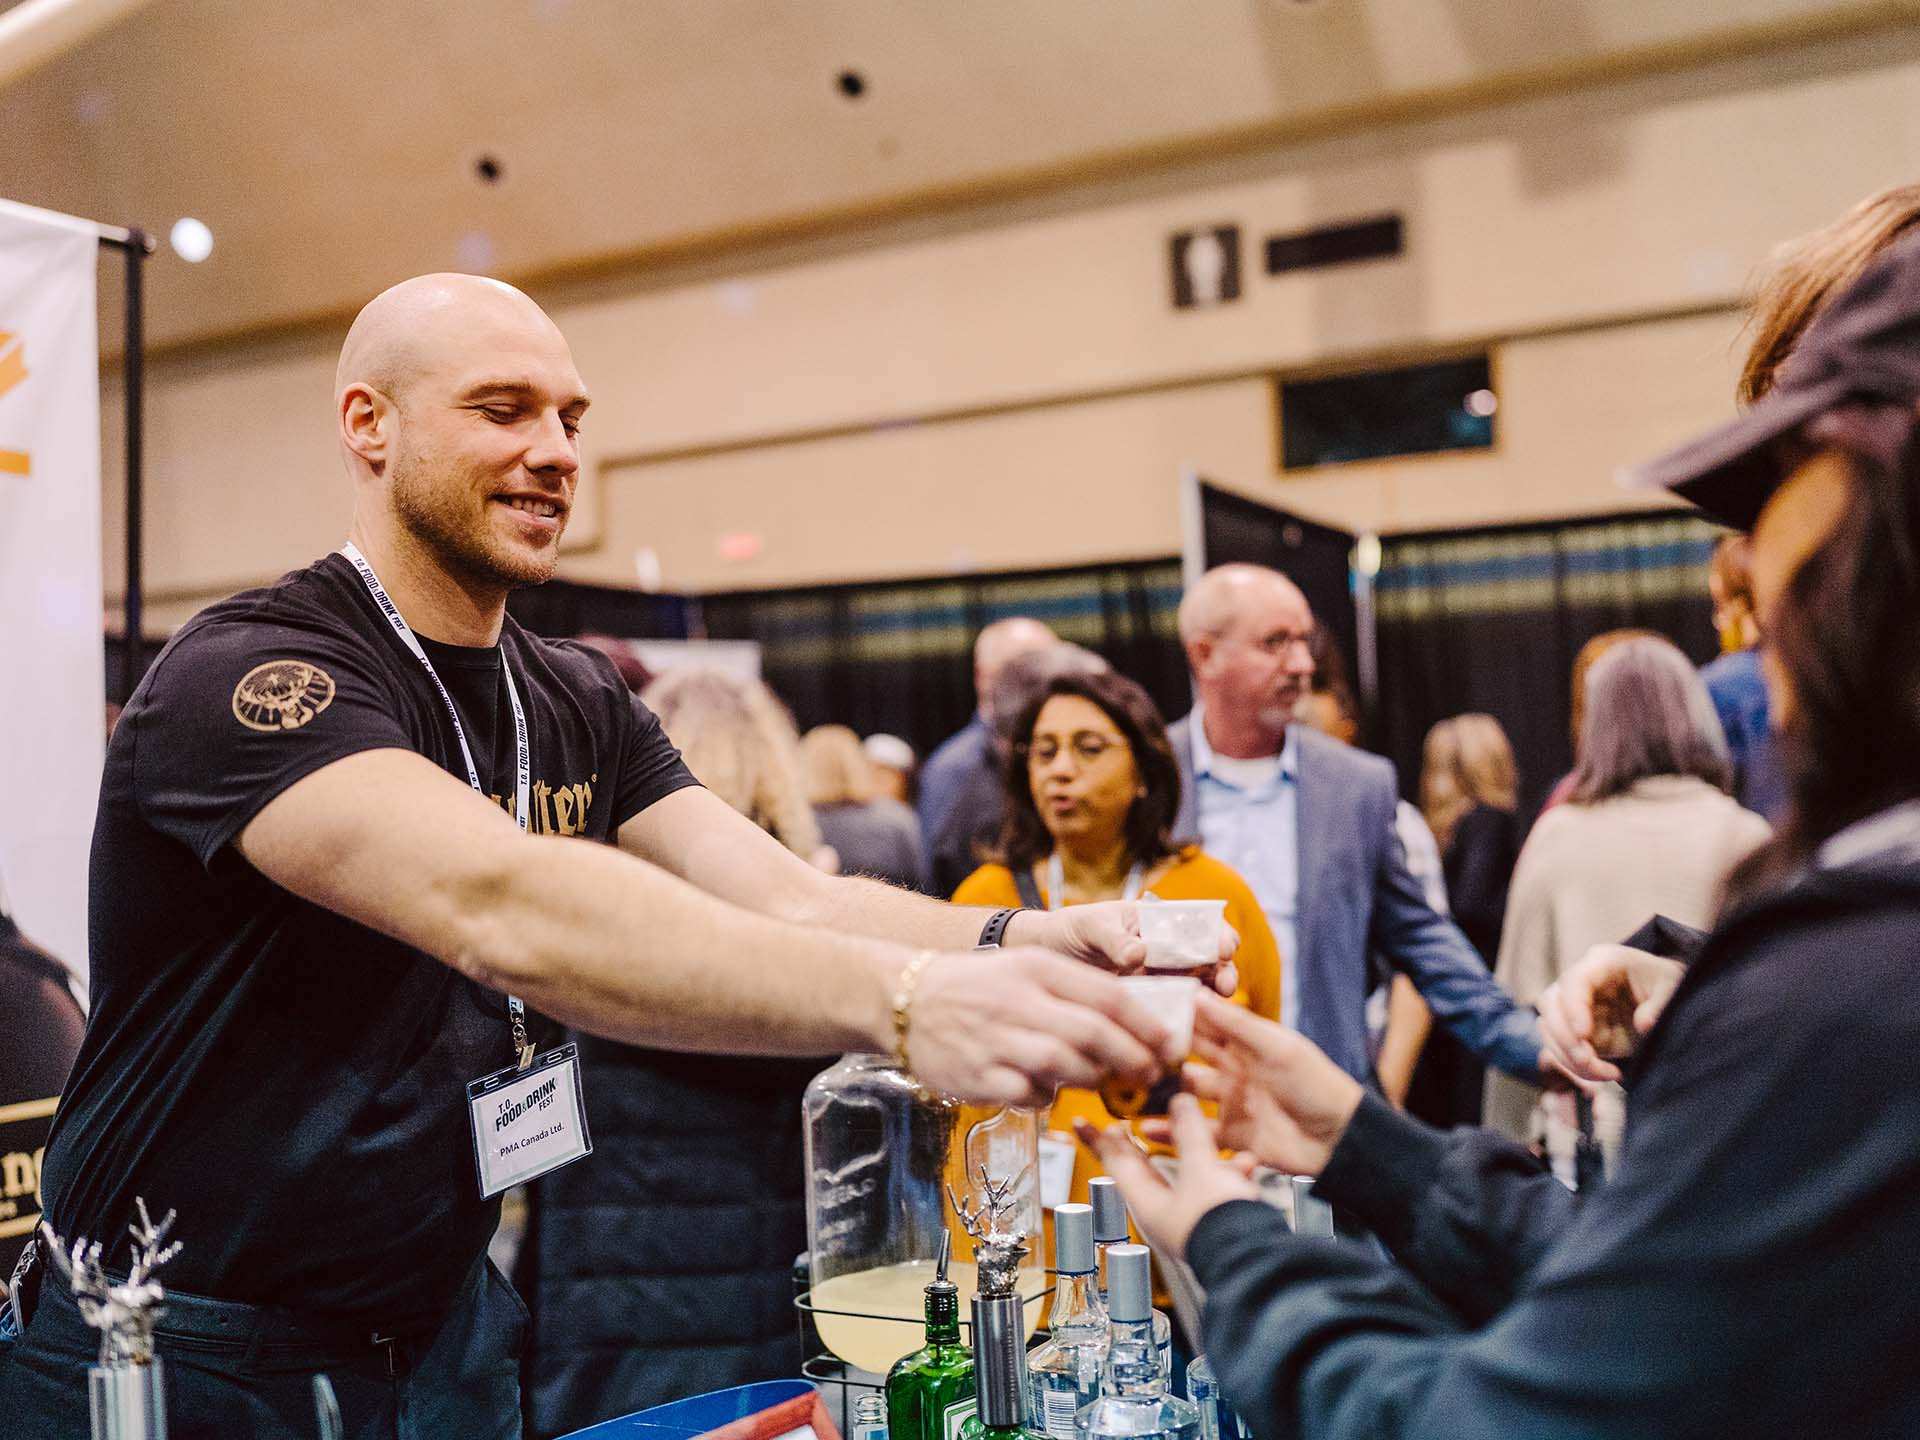 A vendor sharing sample with an attendee at the T.O. Food and Drink Fest